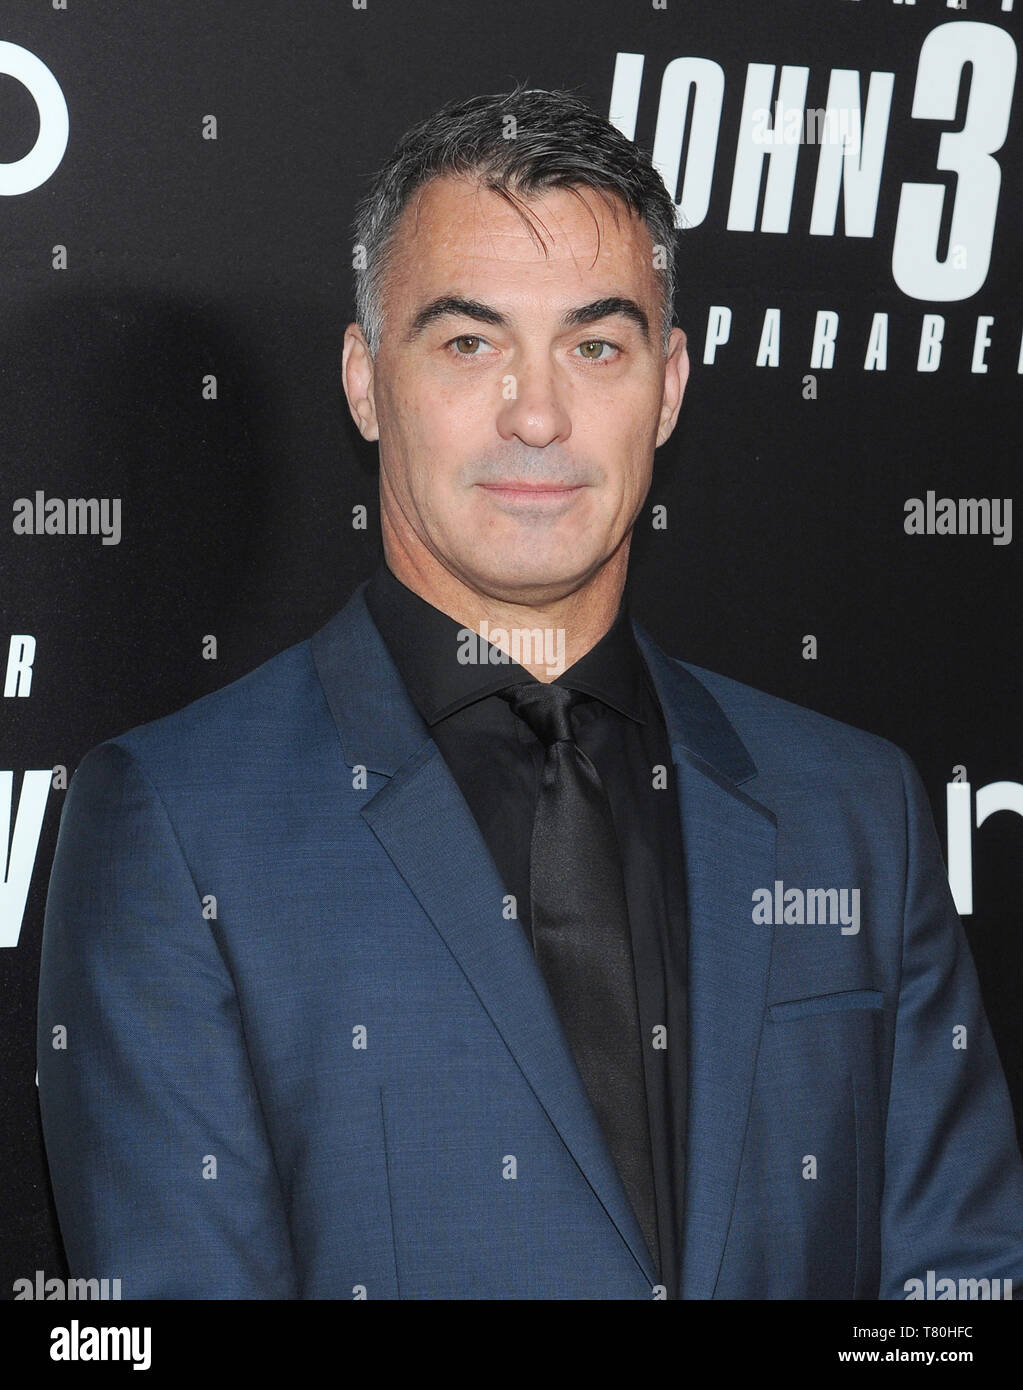 New York, NY, USA. 09th May, 2019. Chad Stahelski attends the 'John Wick: Chapter 3' world premiere at One Hanson Place on May 9, 2019 in New York City. Credit: John Palmer/Media Punch/Alamy Live News Stock Photo